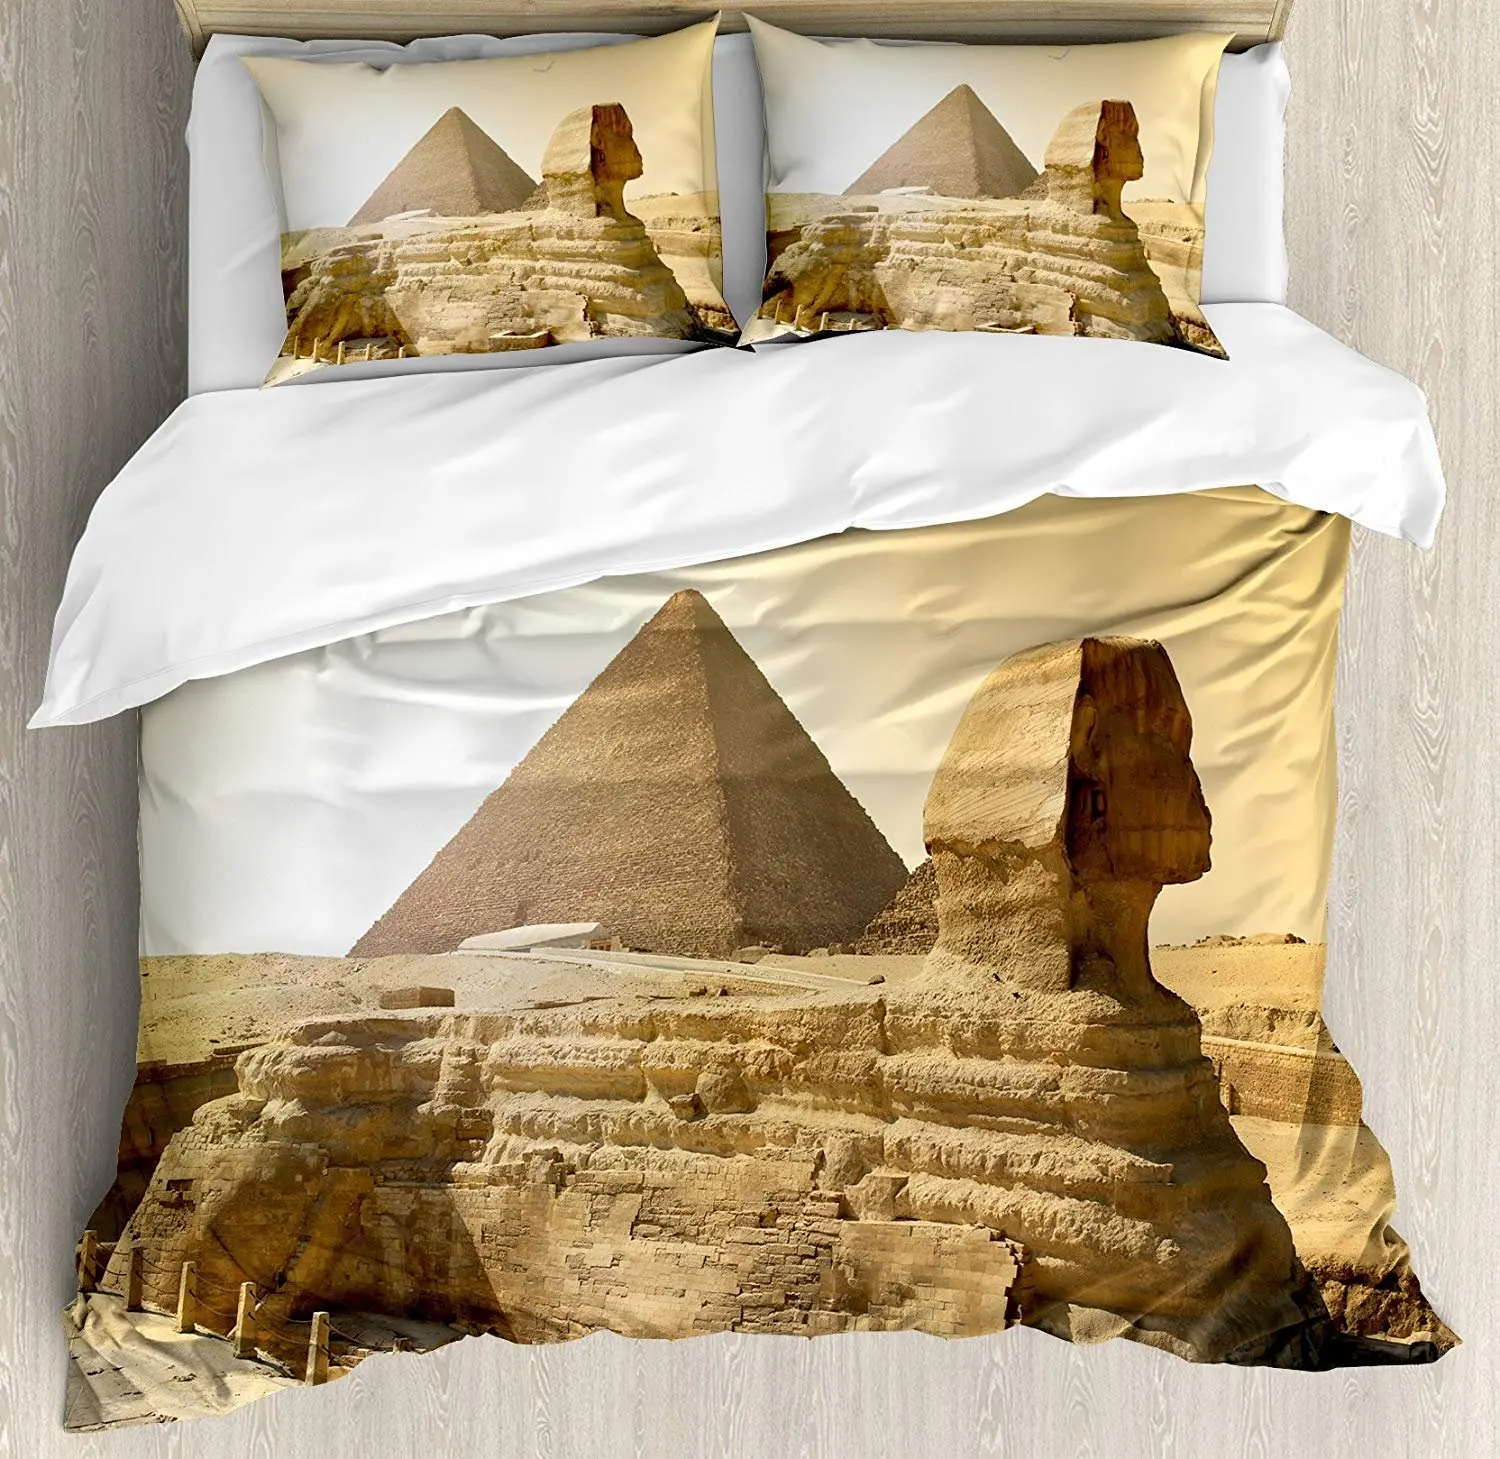 

Ancient Bedding Set Egyptian Pyramids Famous Great Landmark Wonders of the World Heritage View Duvet Cover Pillowcase Bed Set